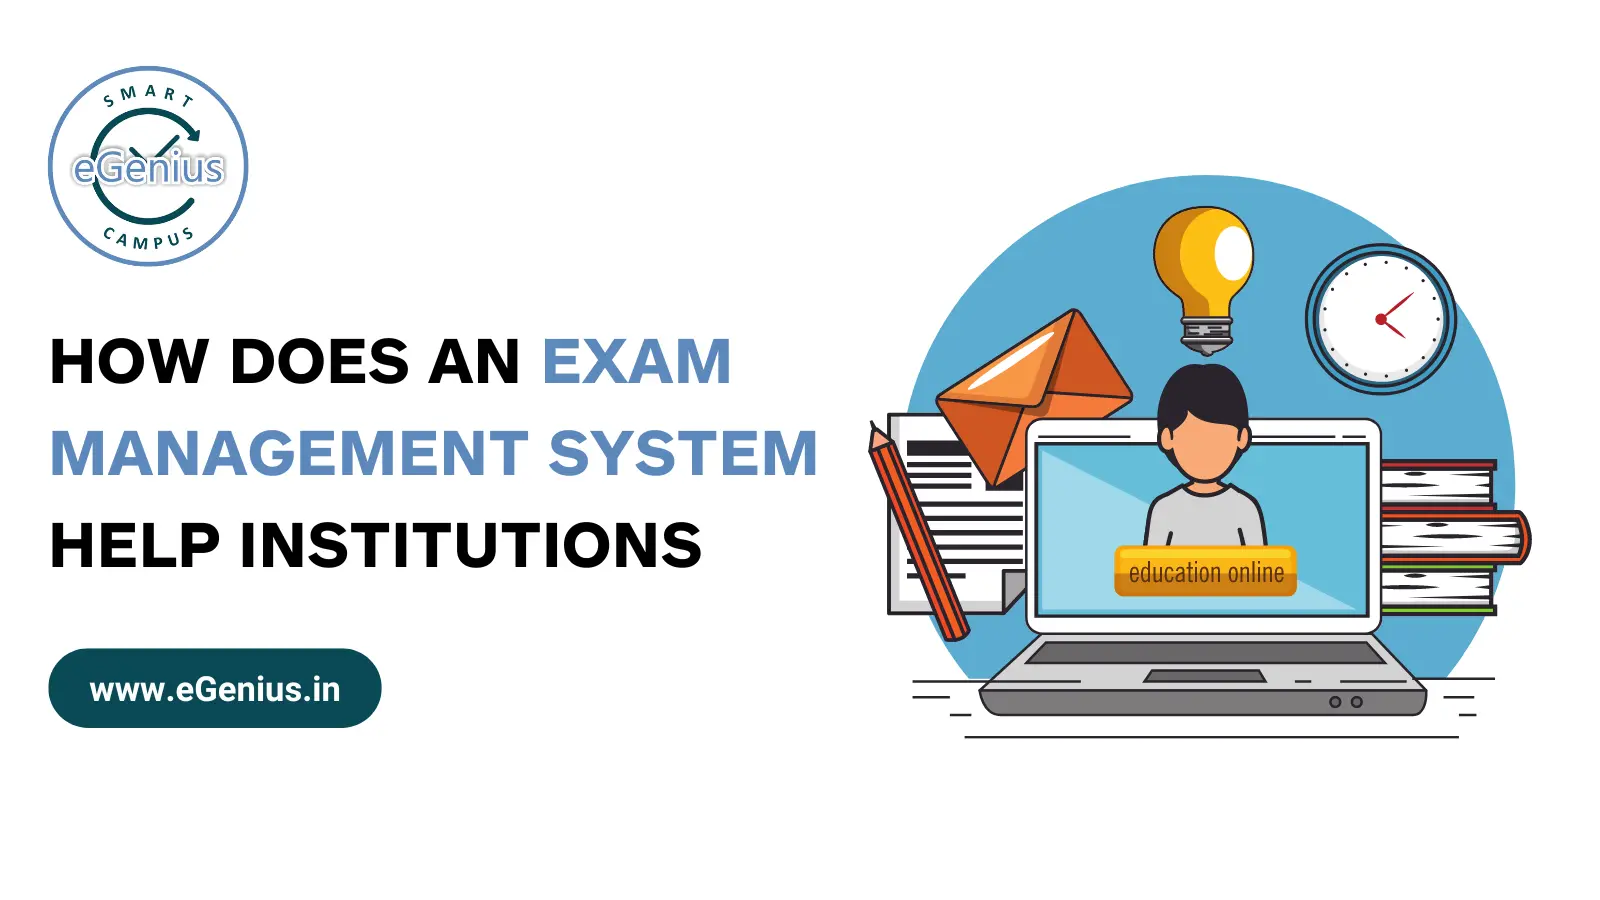 How Does an Exam Management System Help Institutions